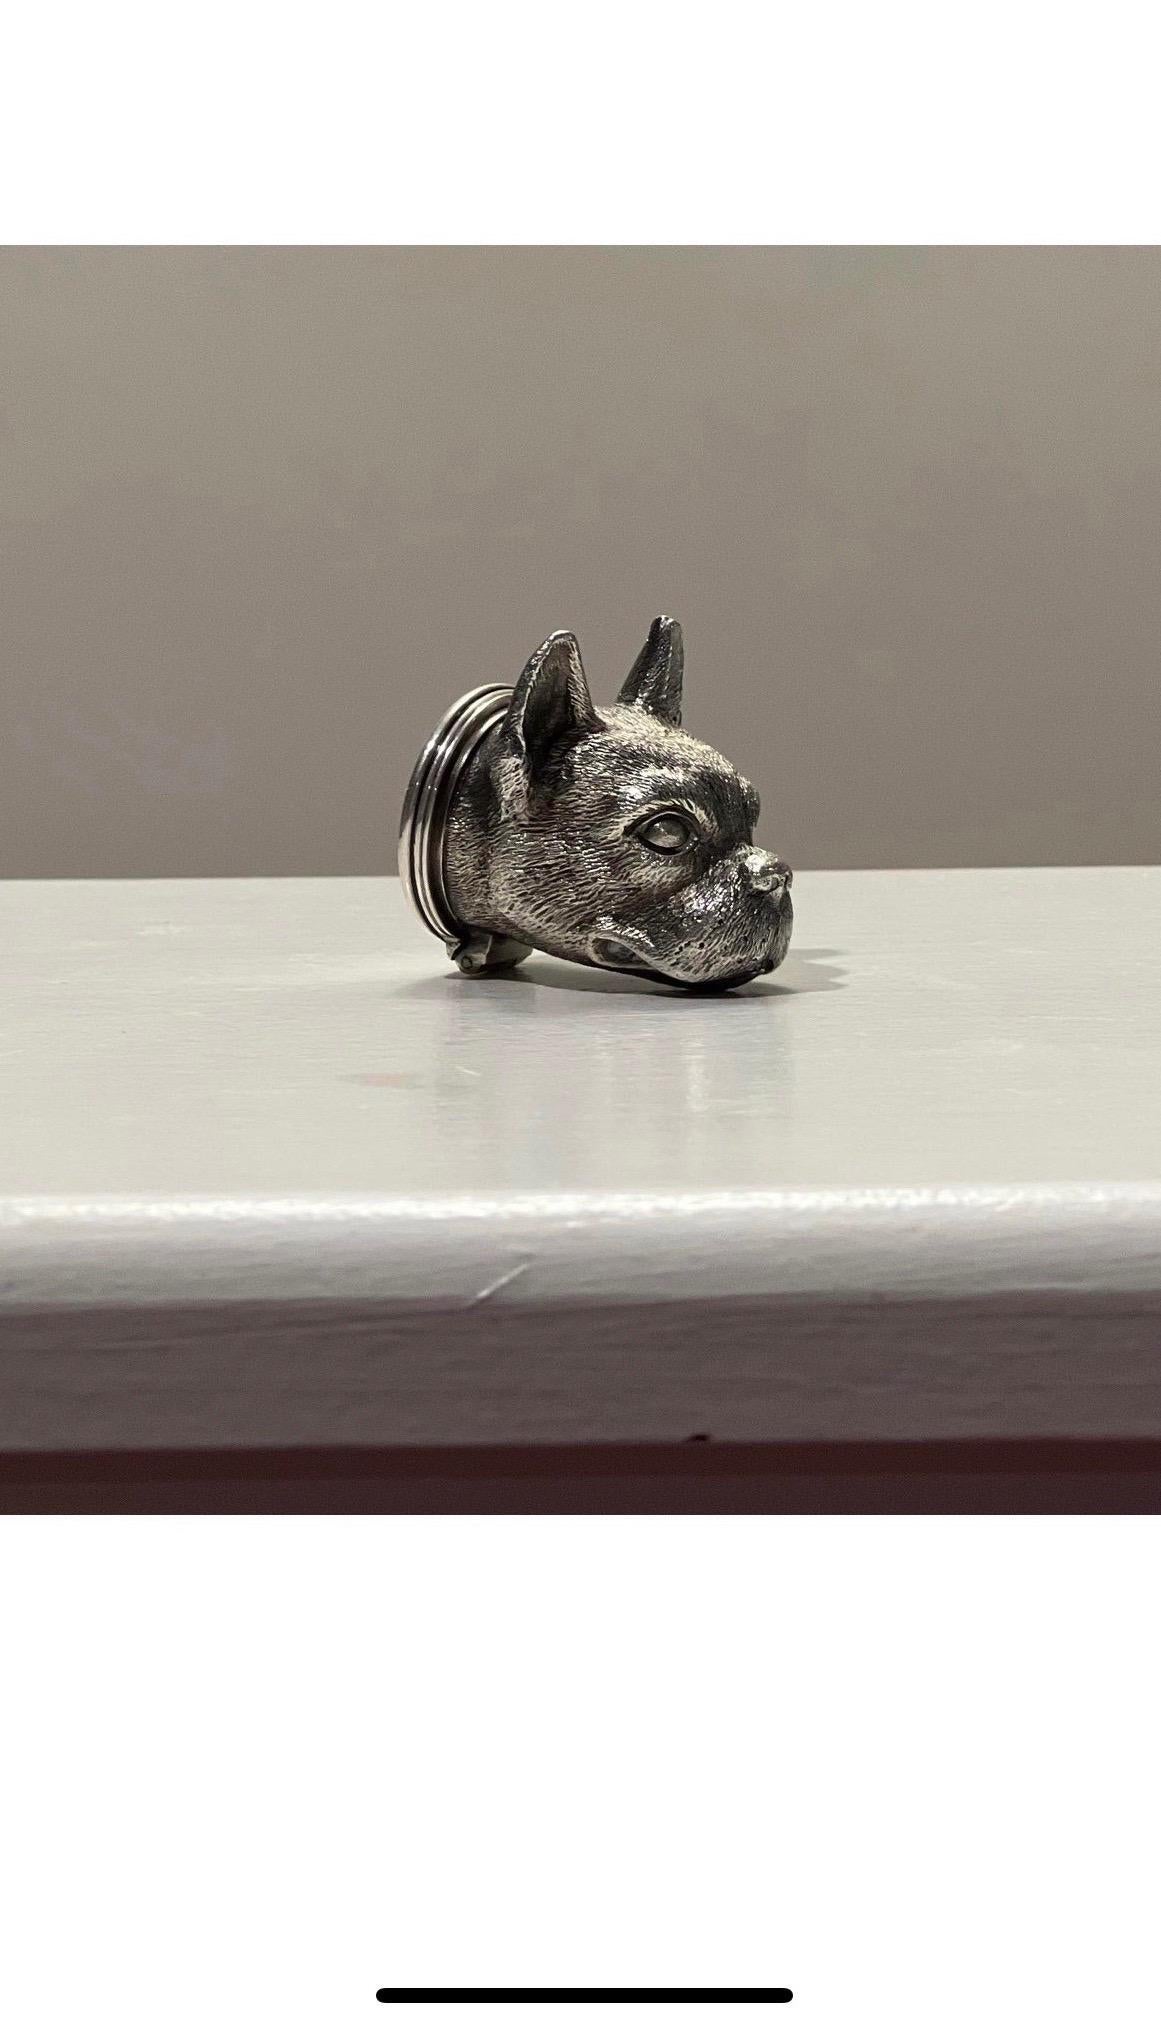 Fine Richard Comyns London sterling silver French bulldog pill box - circa 1988
A beautiful sterling silver pill box with superb quality and very heavy weight!